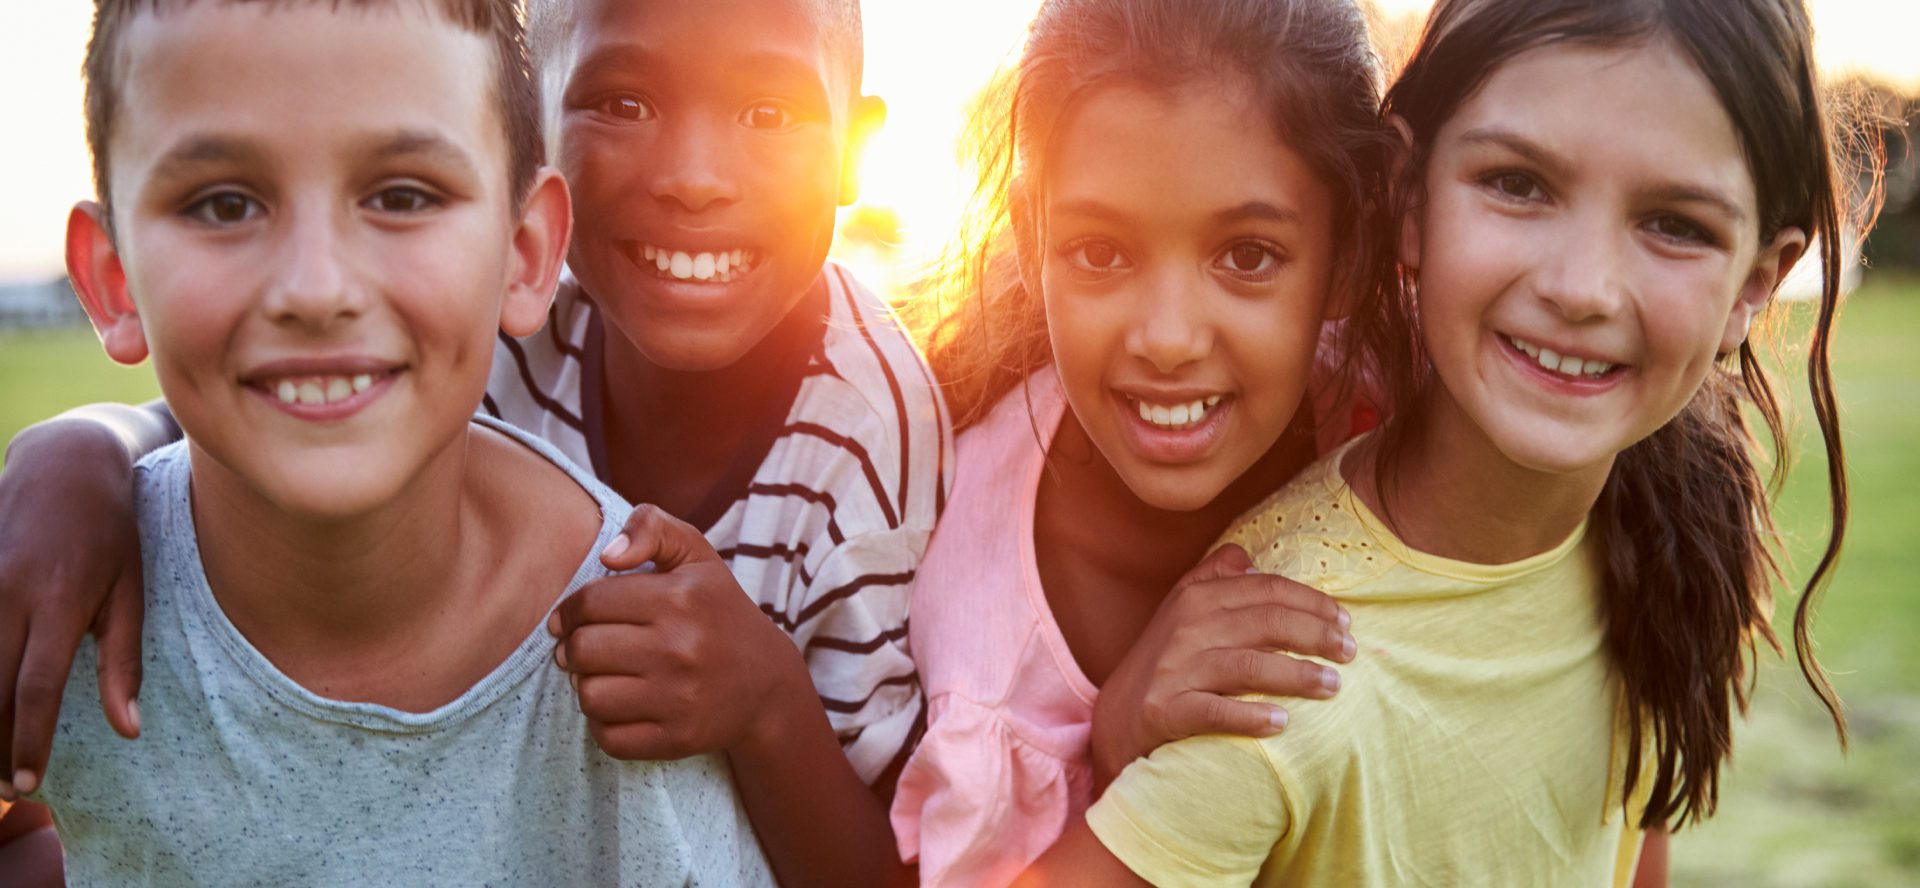 Four children smiling with sunset behind them